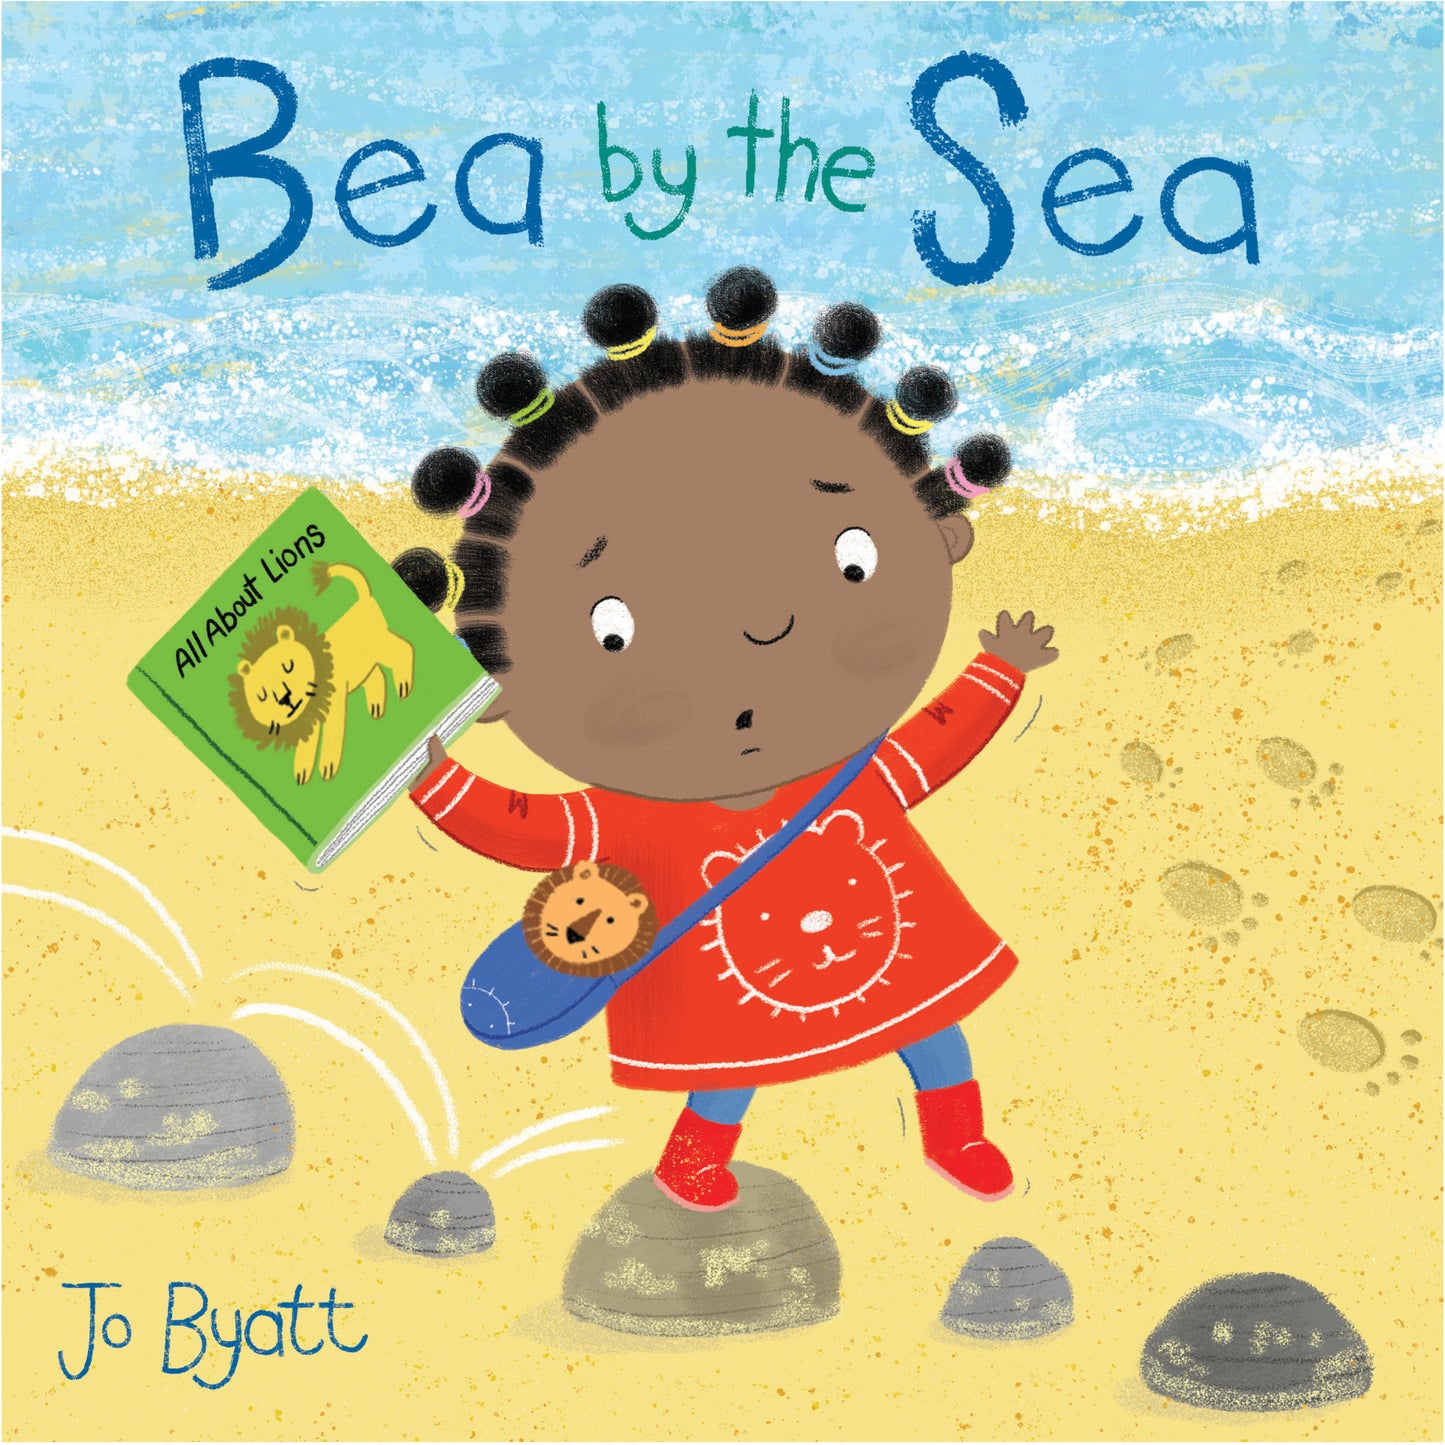 Bea by the Sea (Hardcover Edition)